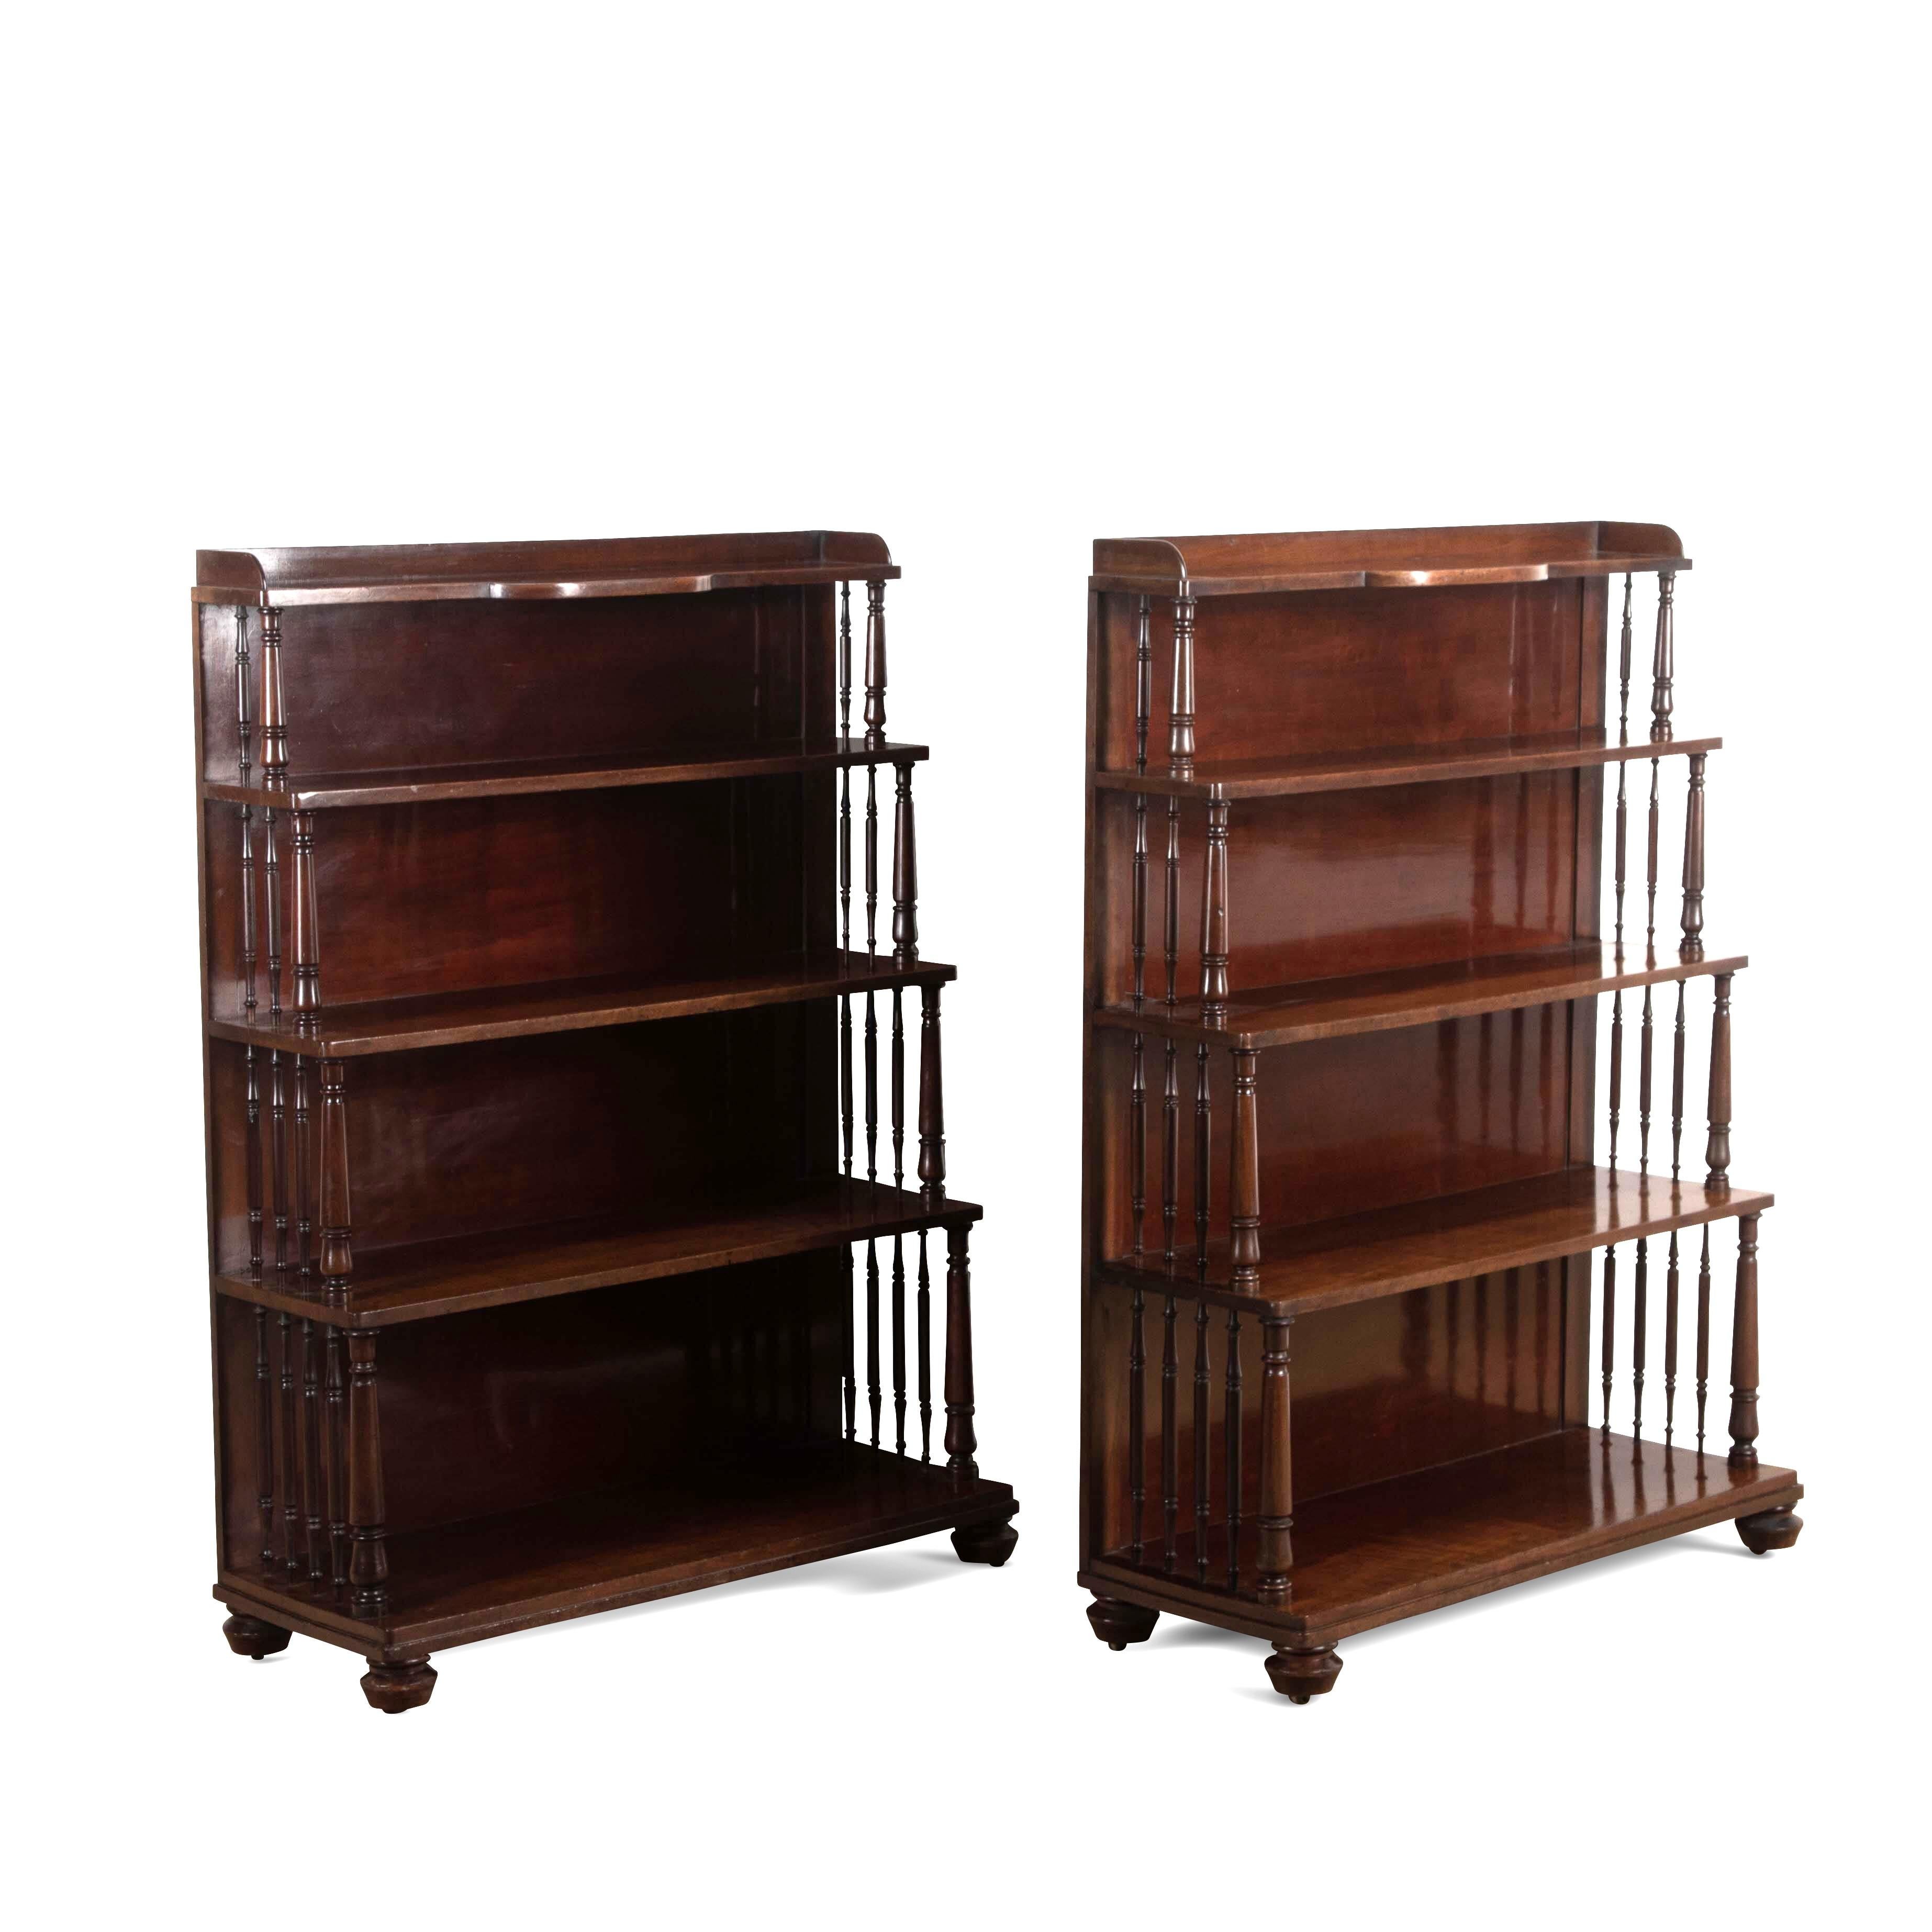 Early 19th Century Pair of 19th Century Regency Mahogany Waterfall Bookcases For Sale